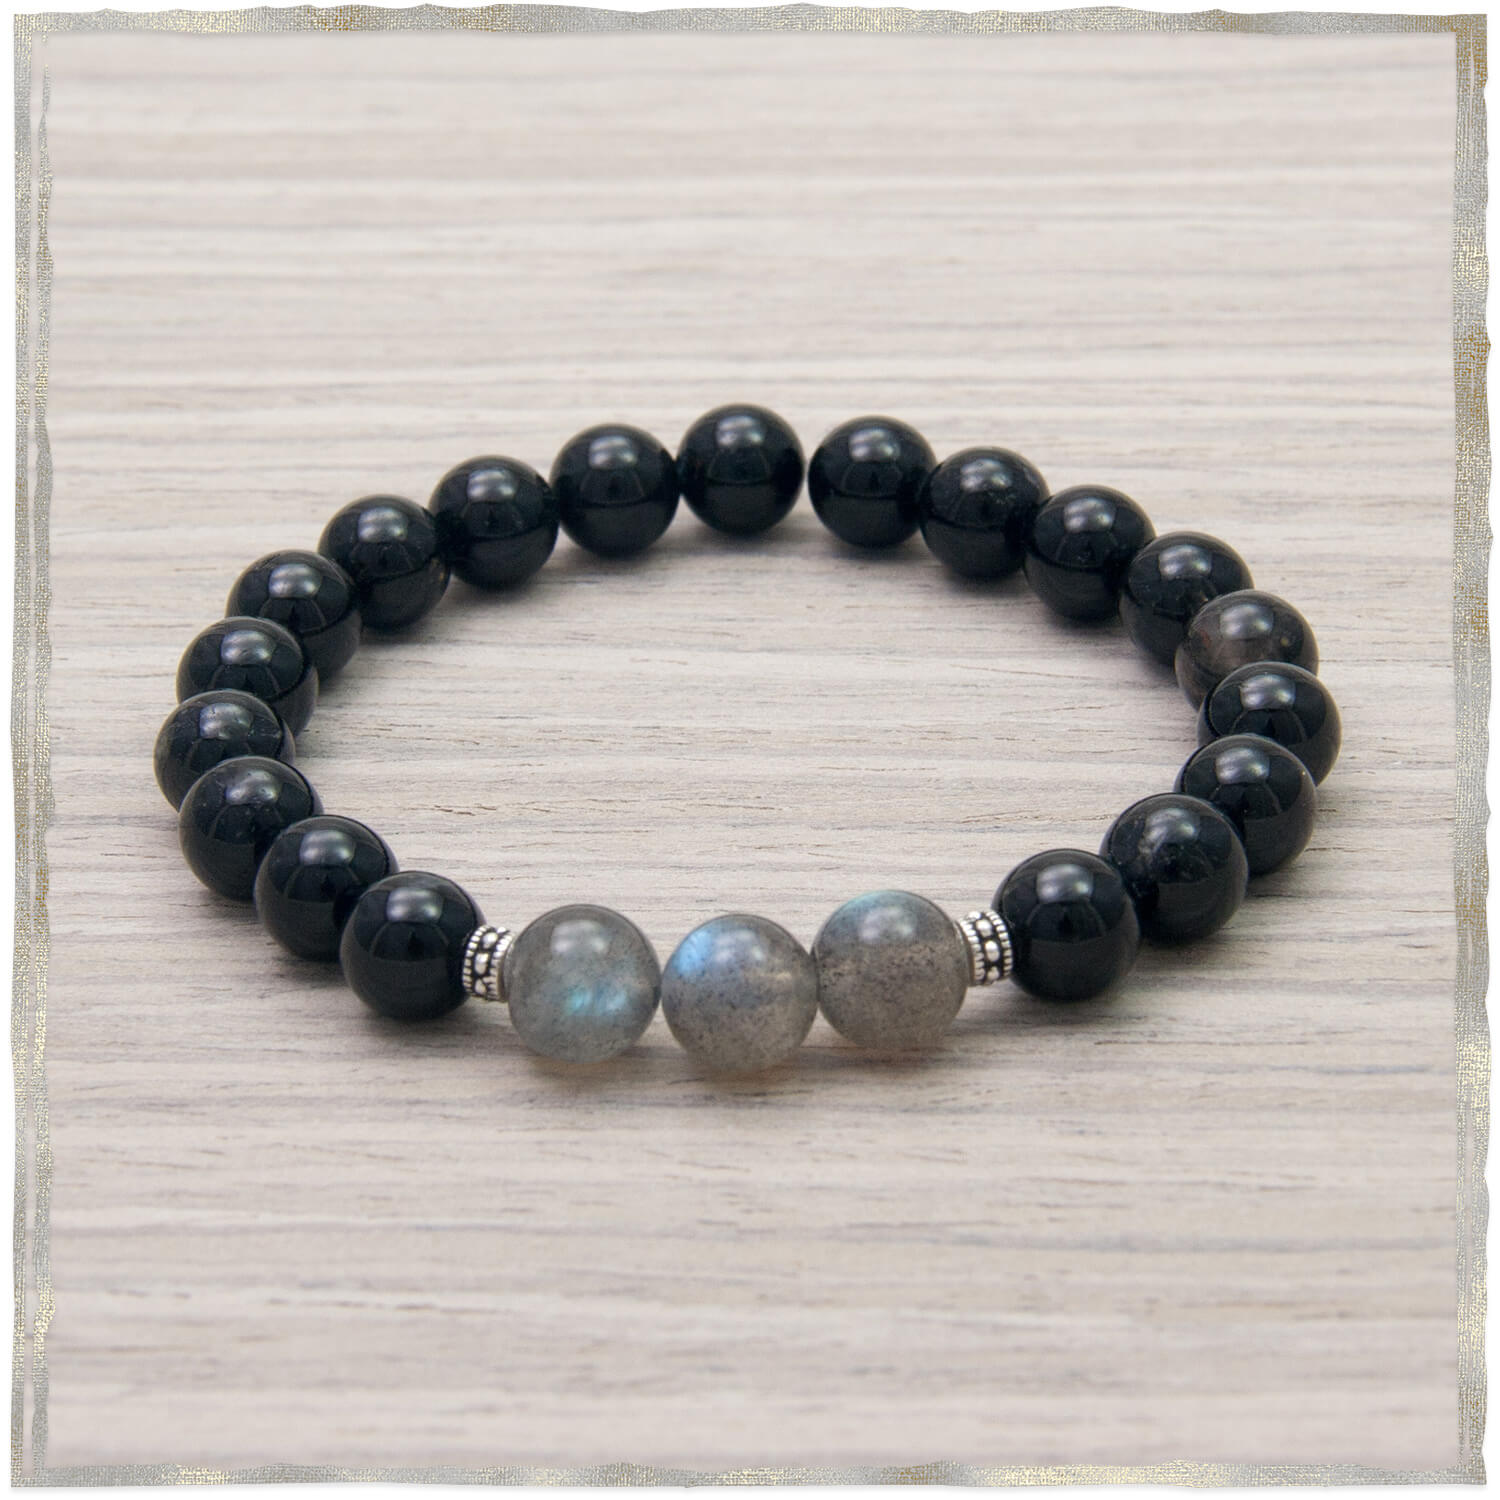 Mixed Tourmaline Bracelets for heart healing, protection, and invoking your  inner warrior